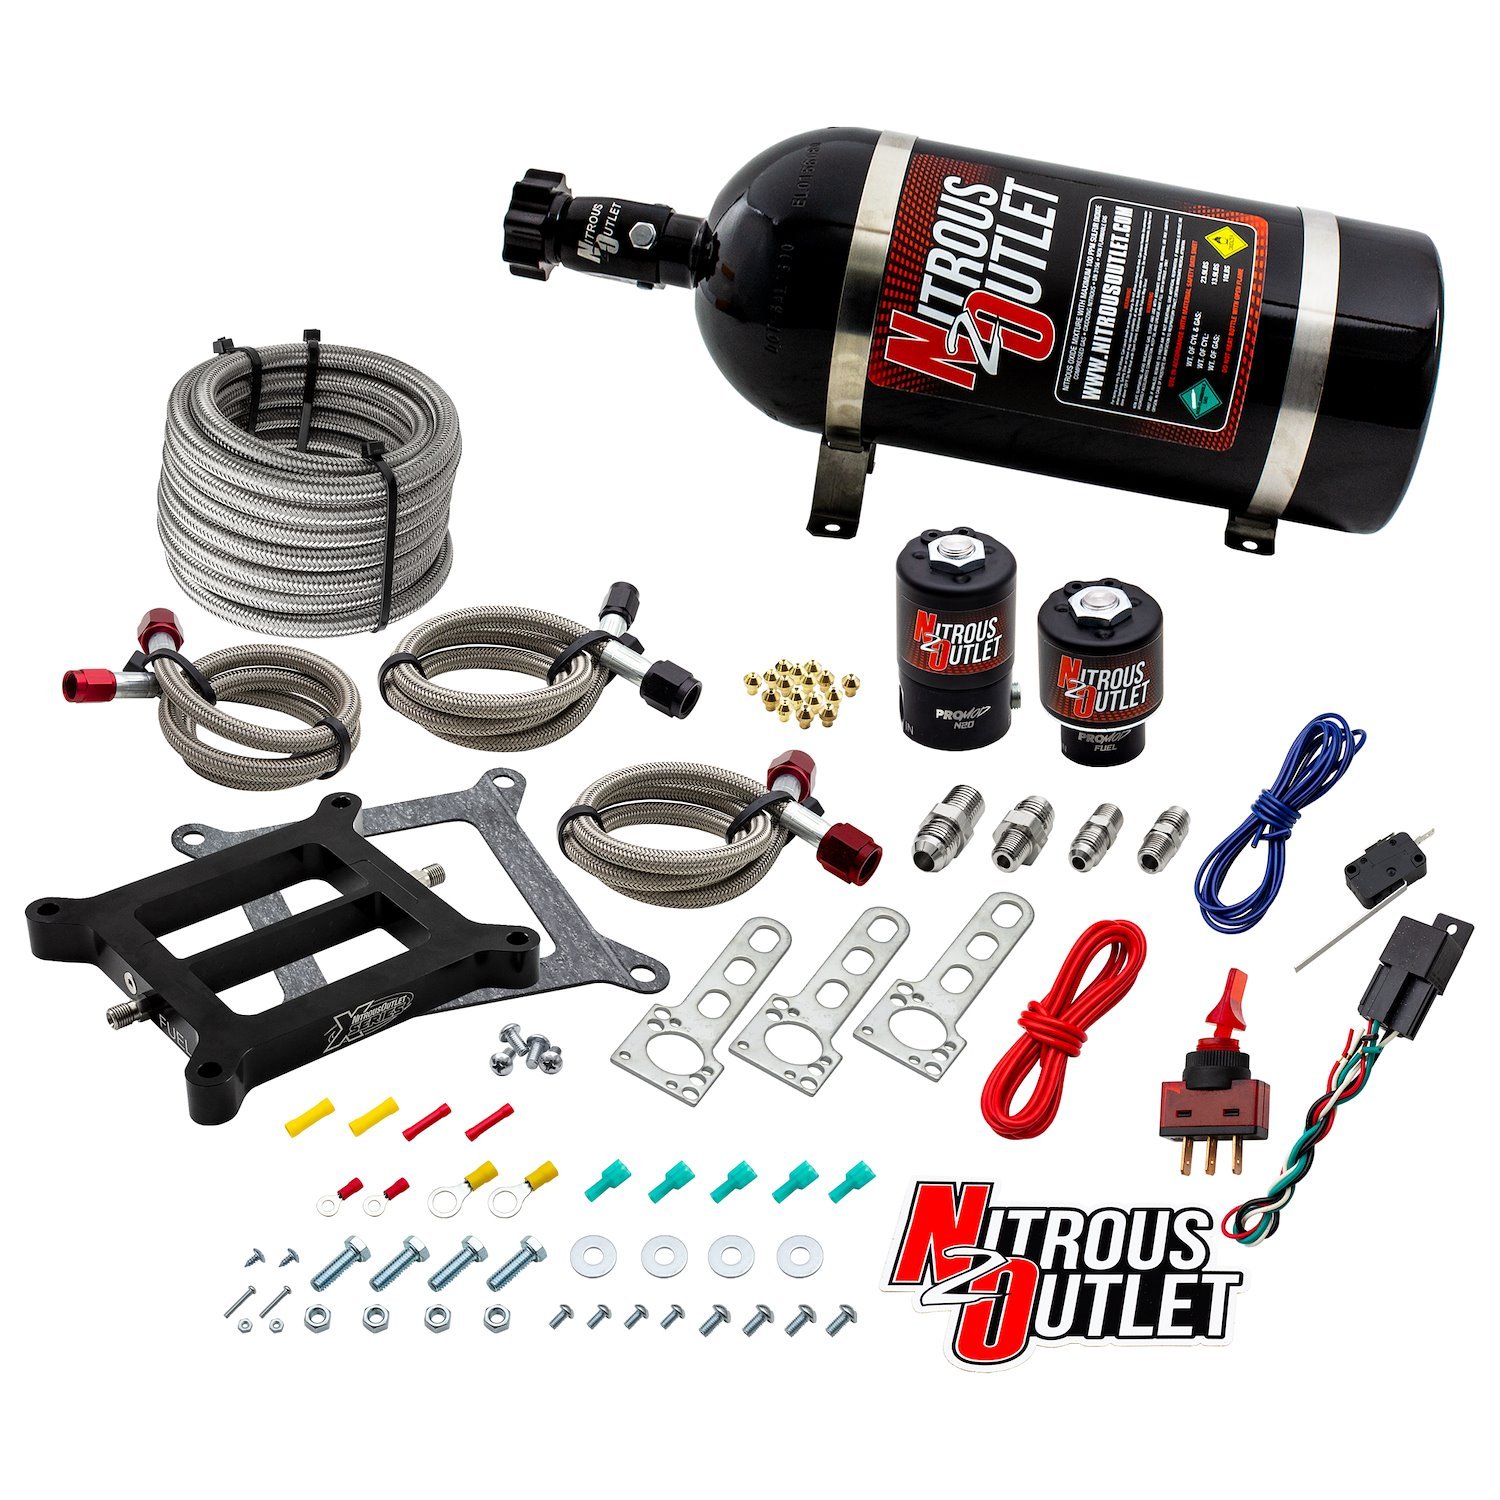 00-10070-10 Weekend Warrior 4150 Plate System, Gas/E85, 5-55psi, 100-350 HP, 10LB Bottle